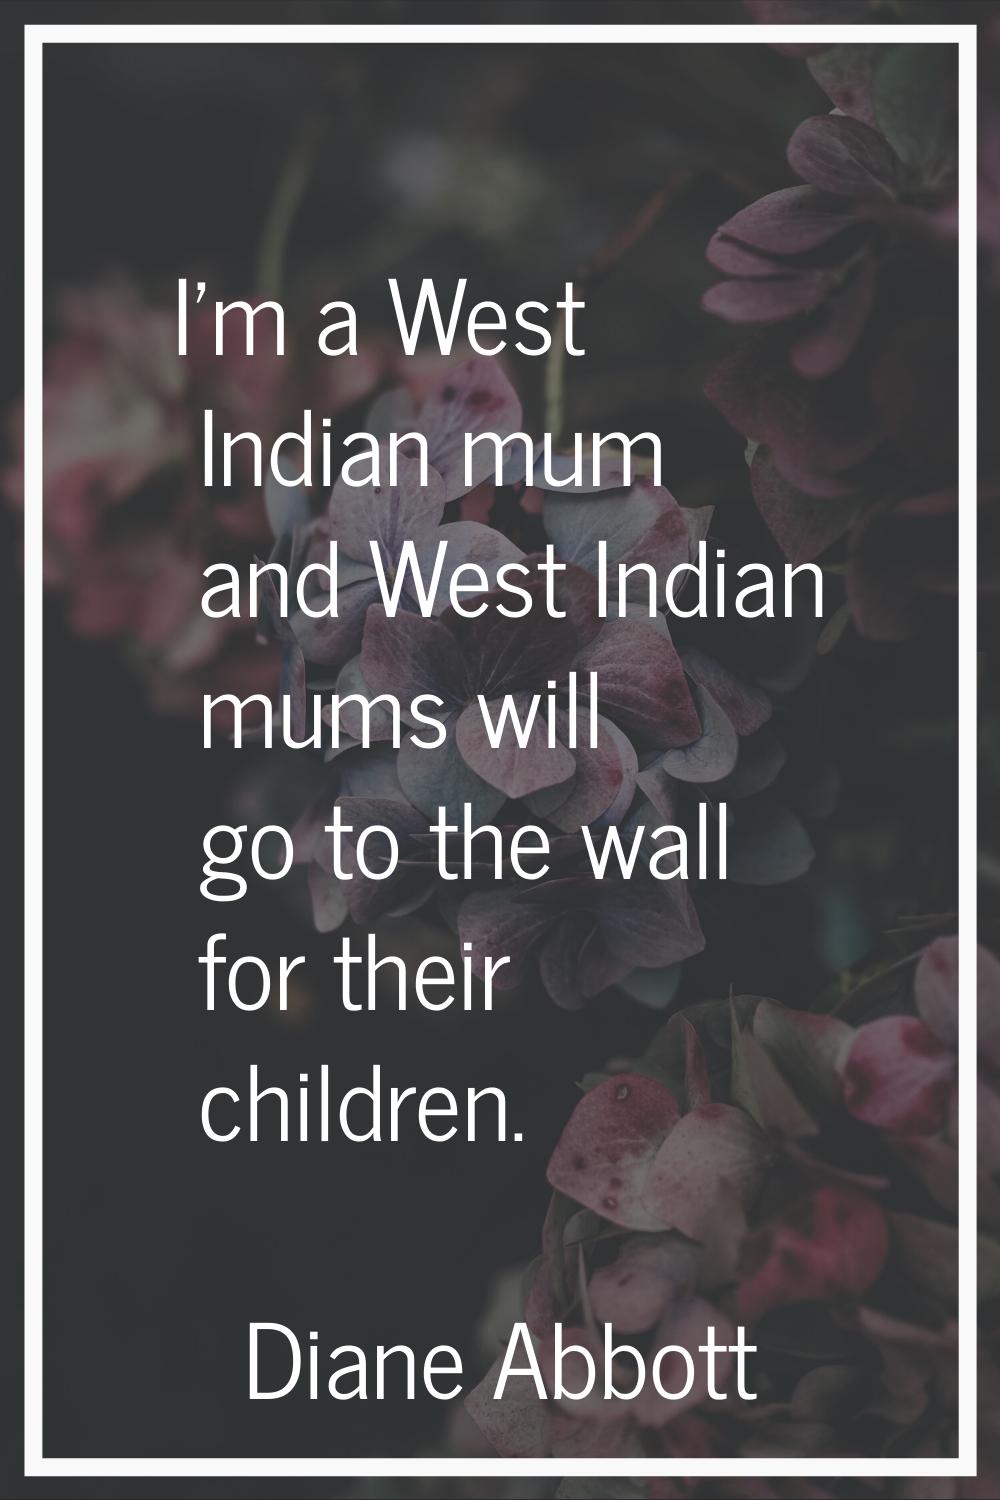 I'm a West Indian mum and West Indian mums will go to the wall for their children.